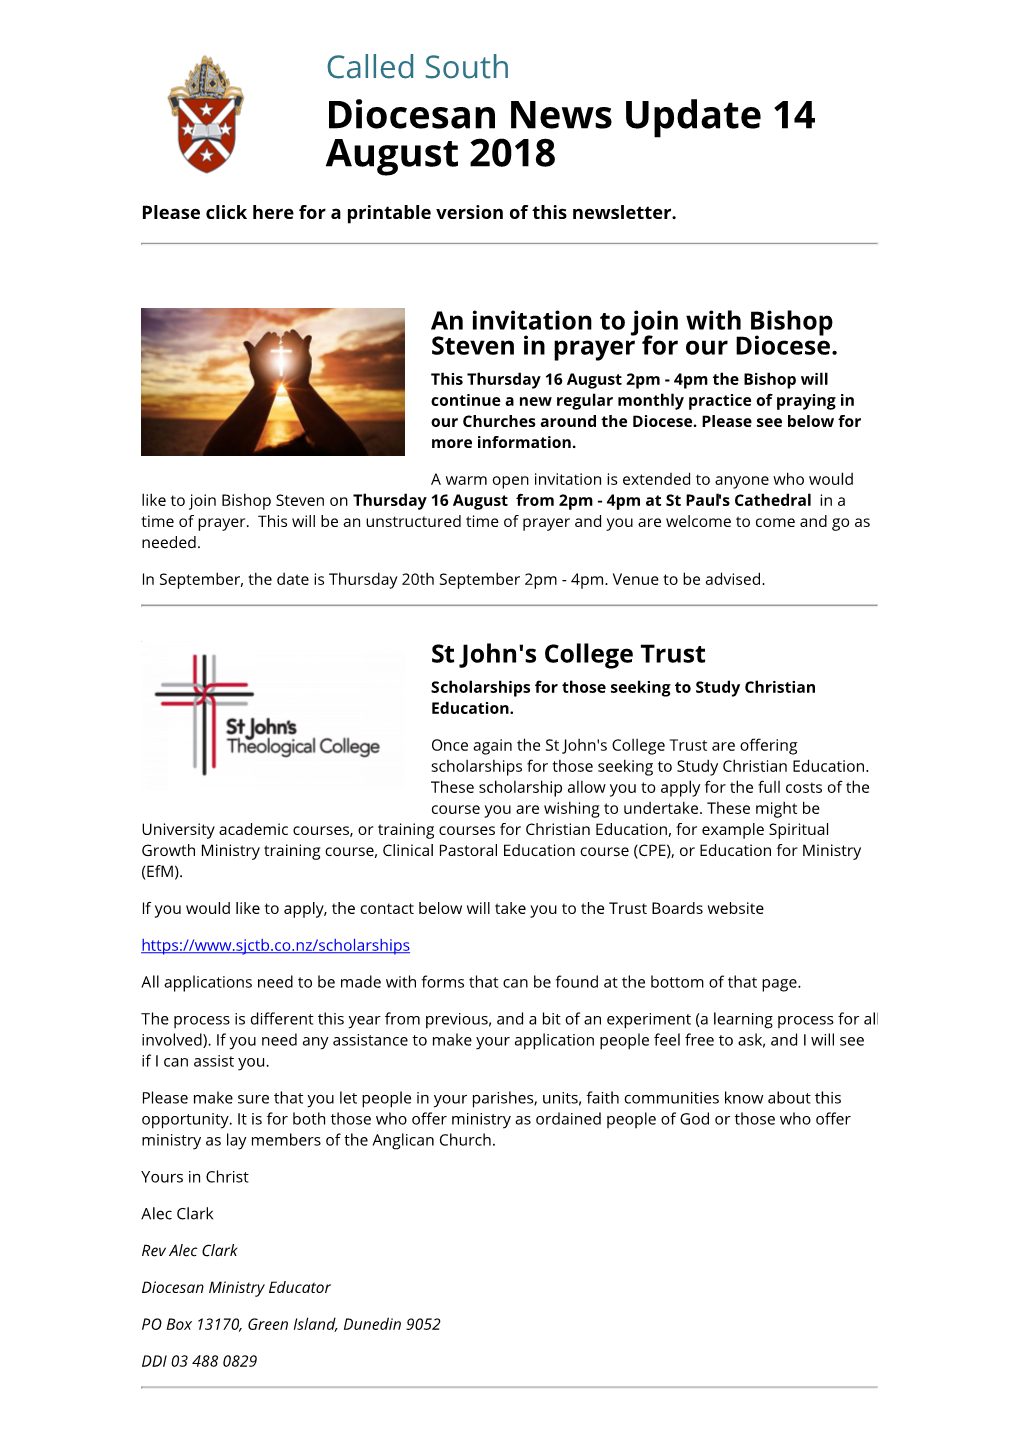 Diocesan News Update 14 August 2018 by Called